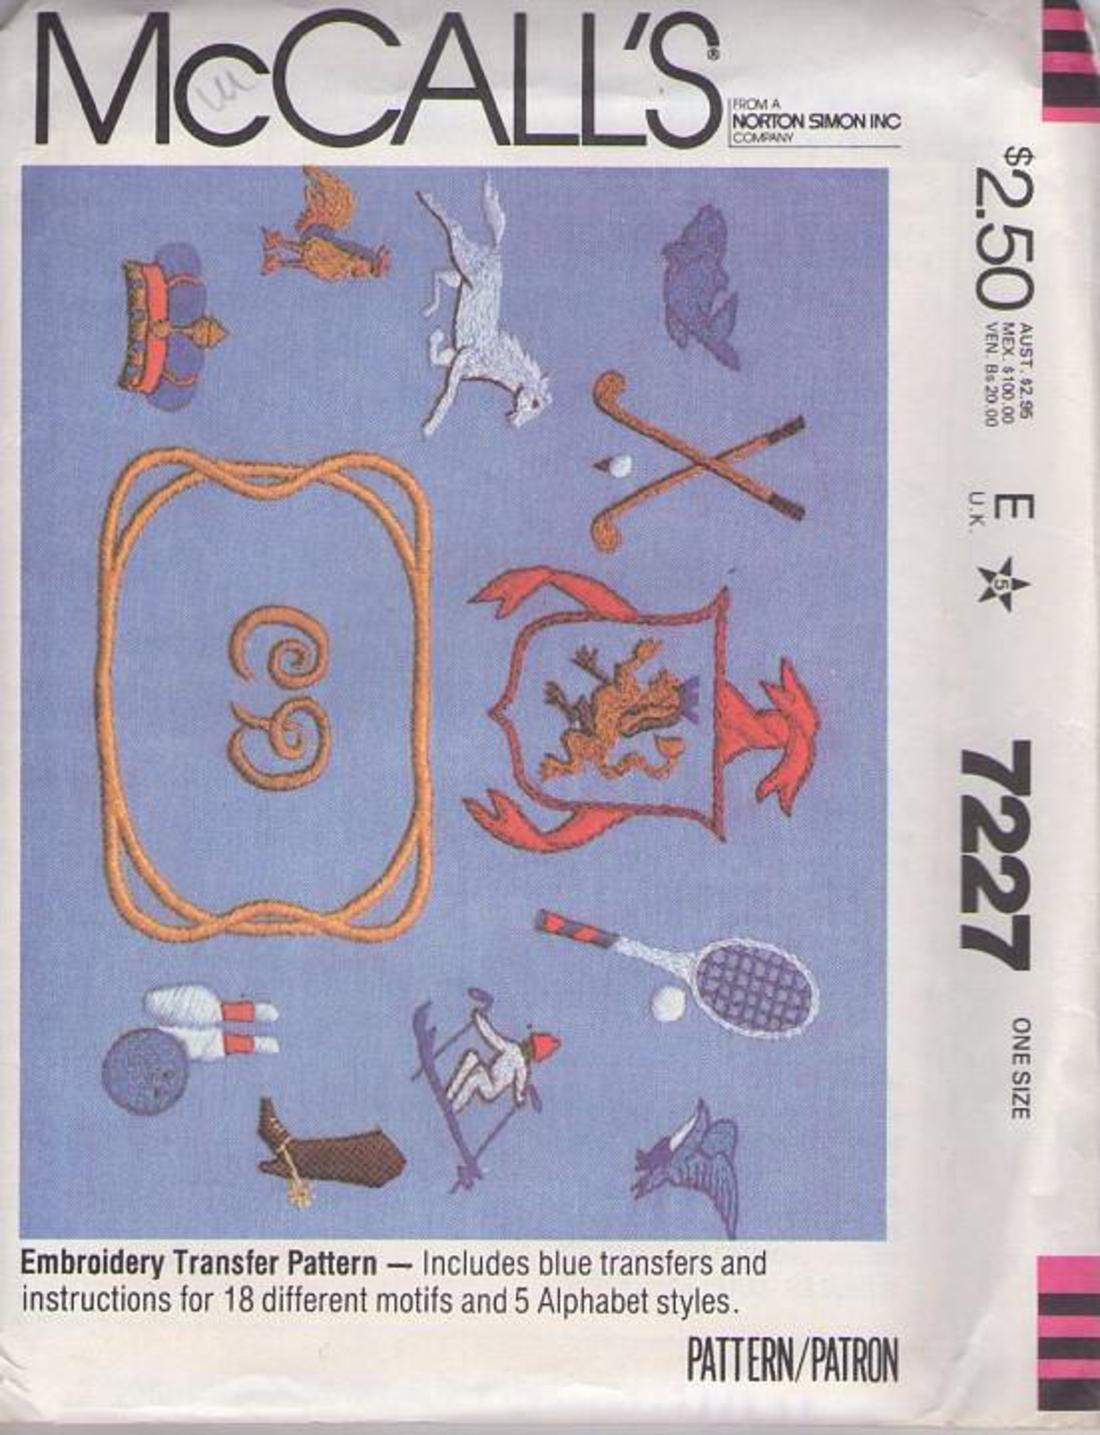 Vintage Embroidery Transfer Patterns Mccalls 7227 Vintage 70s Sewing Pattern Sporty Sports Motif Embroidery Transfers Monogram Alphabet Tennis Golf Skeeing Bowling More